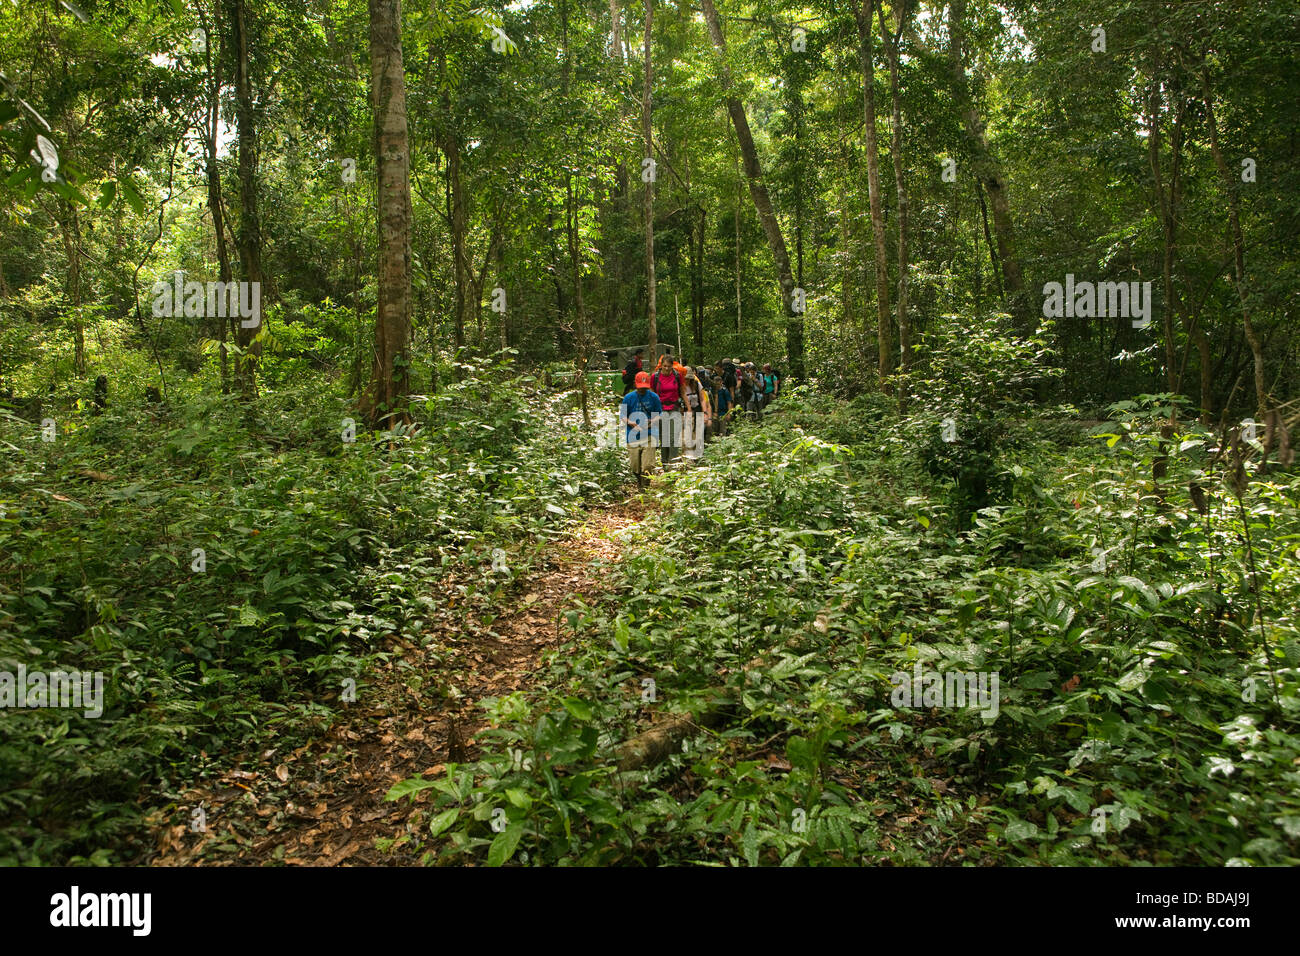 Indonesia Sulawesi Operation Wallacea sixth form students starting rainforest walk at forest fringe Stock Photo